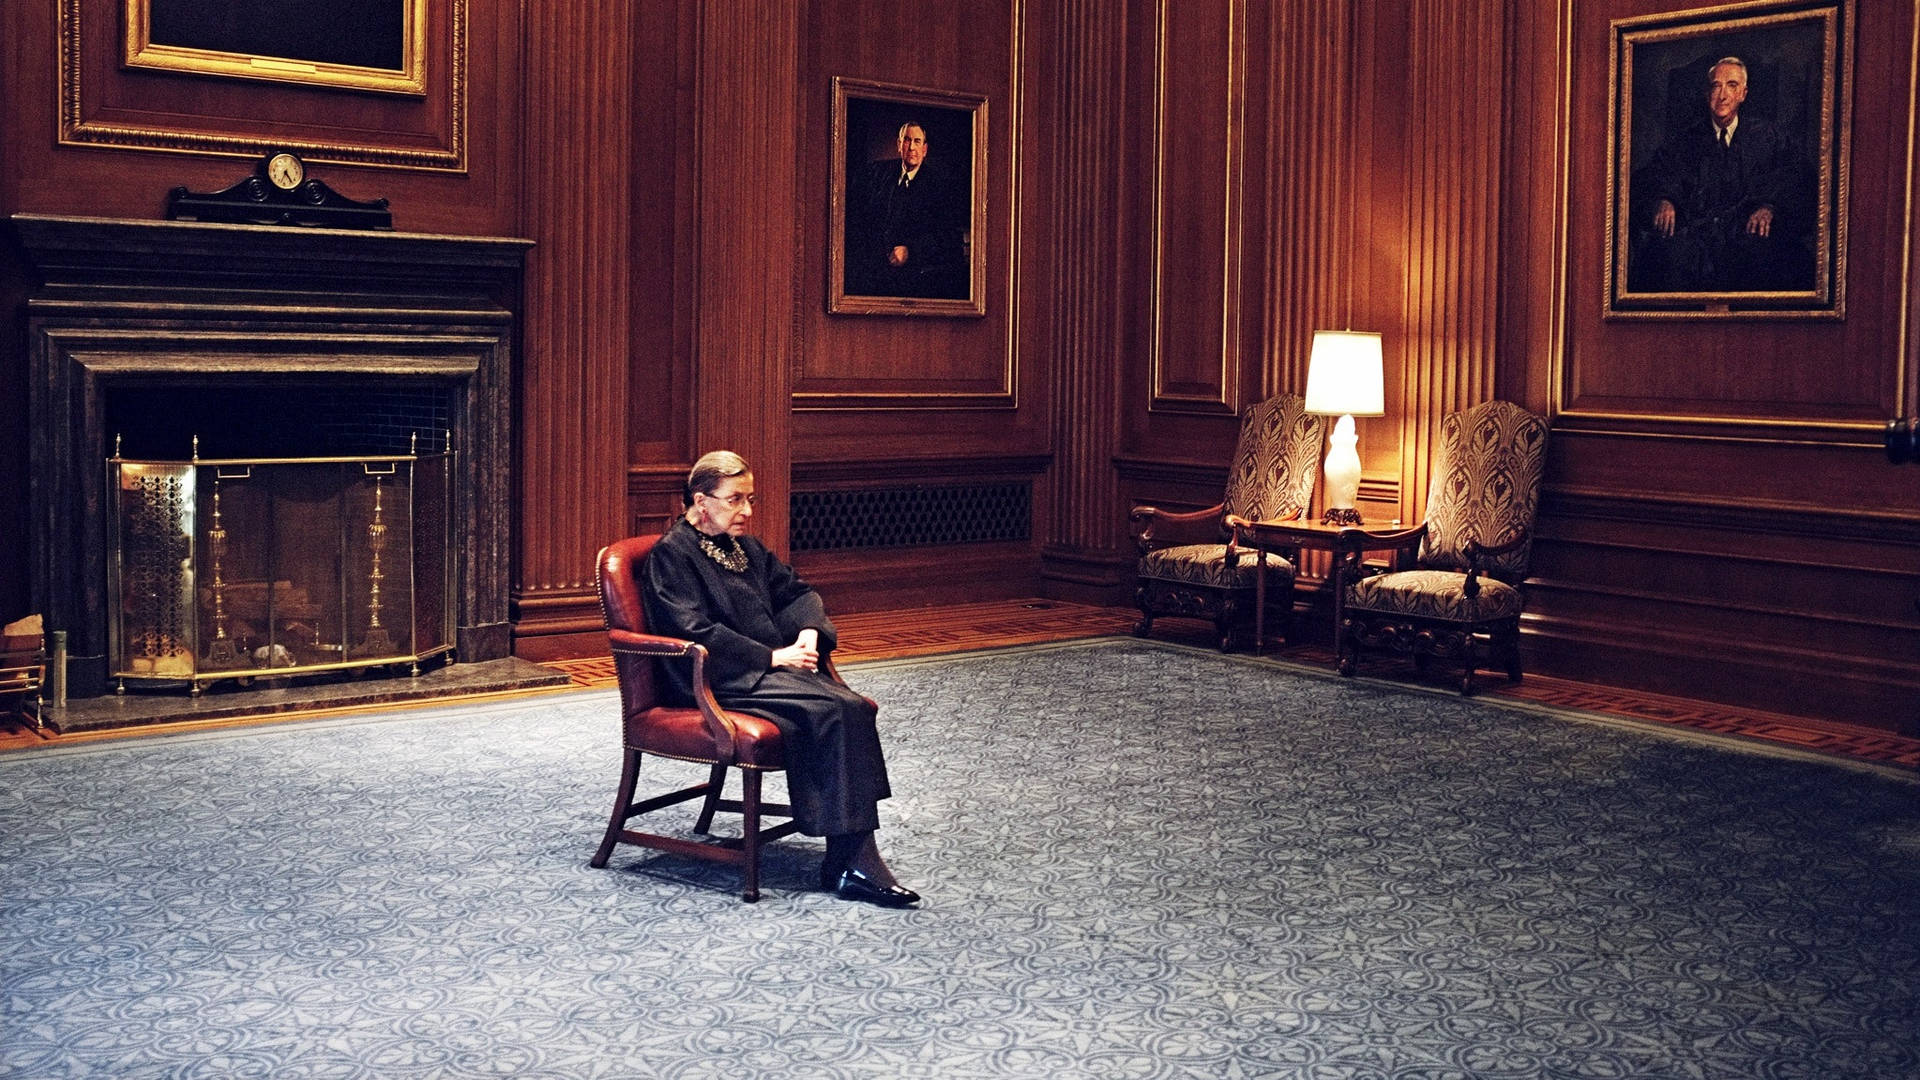 Ruth Bader Ginsburg Room With Paintings